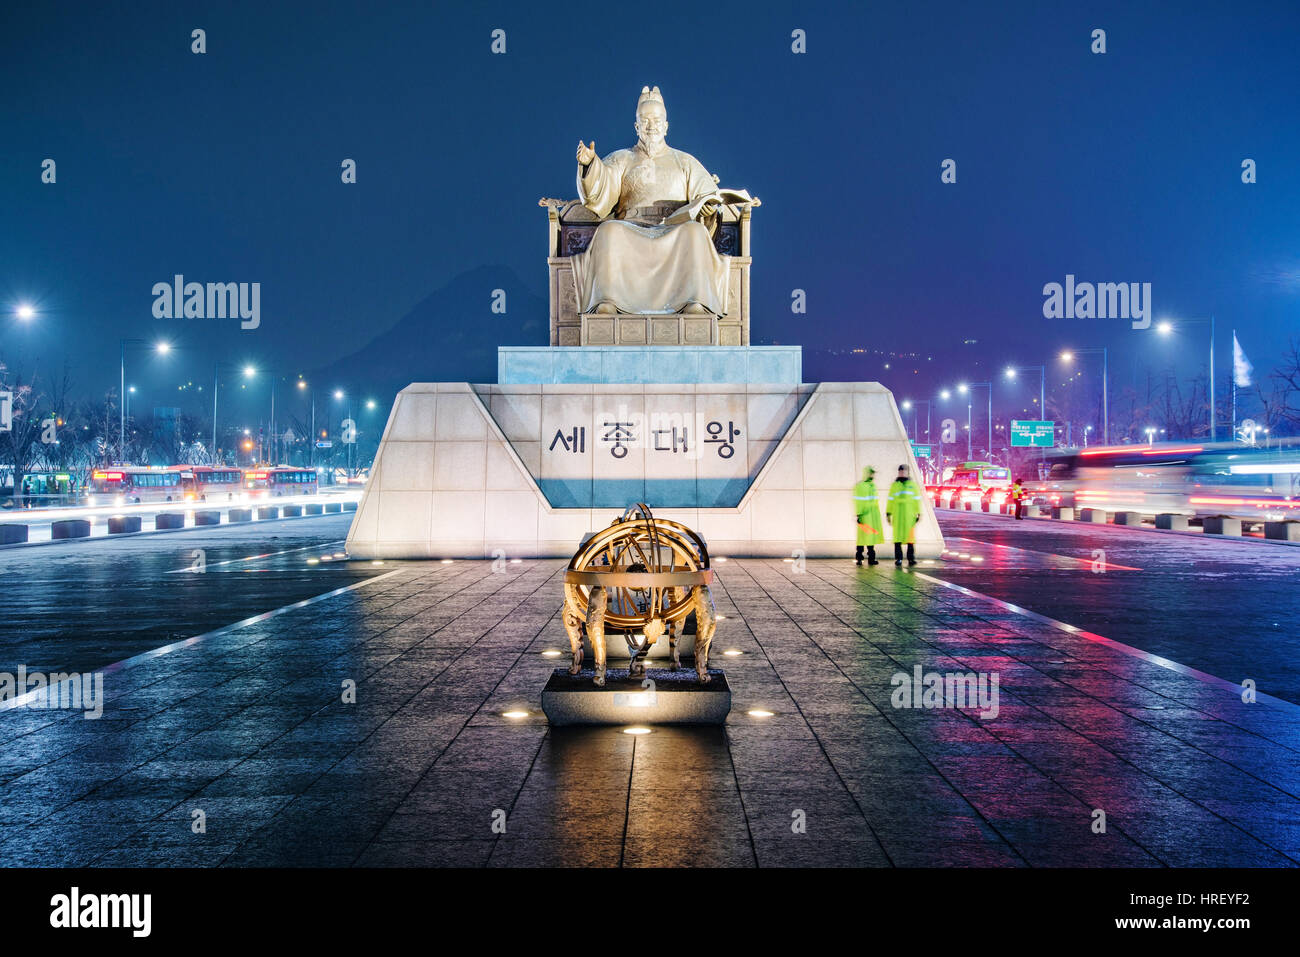 SEOUL, SOUTH KOREA - JANUARY 14: This is a statue of King Sejong and is a a famous landmark of central Seoul where many tourists visit on January 14,  Stock Photo